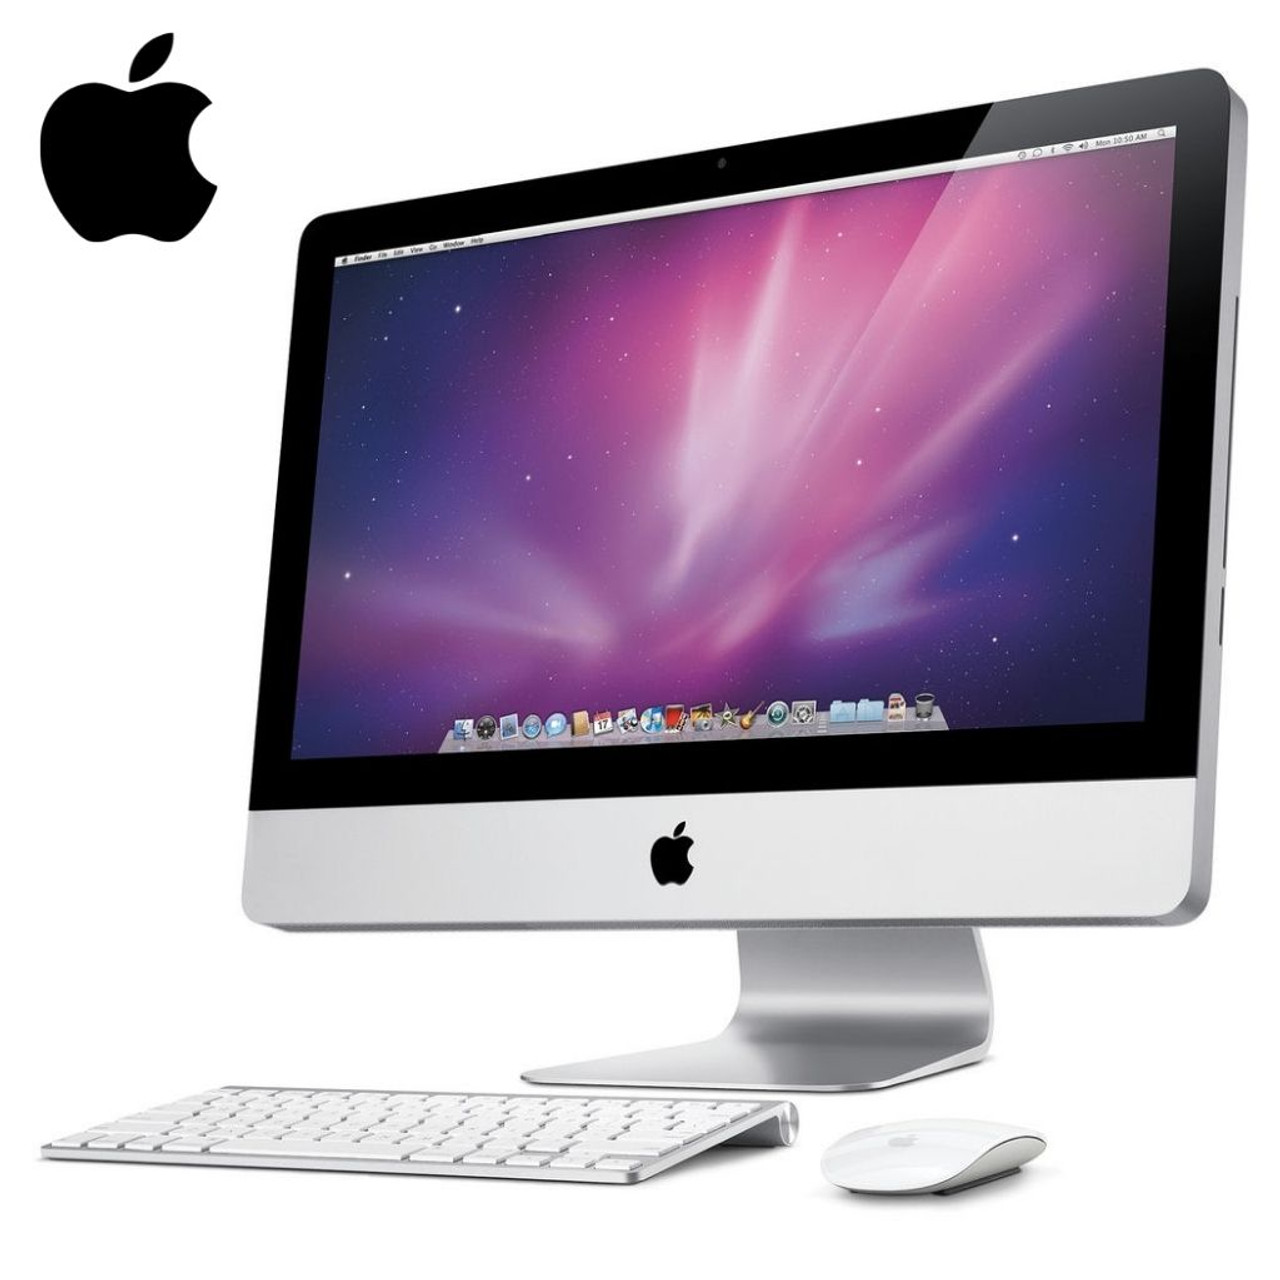 Apple® iMac 21.5” with Intel 3.2GHz, 4GB RAM, 500GB HDD + Keyboard/Mouse $289.99 (64% off)￼